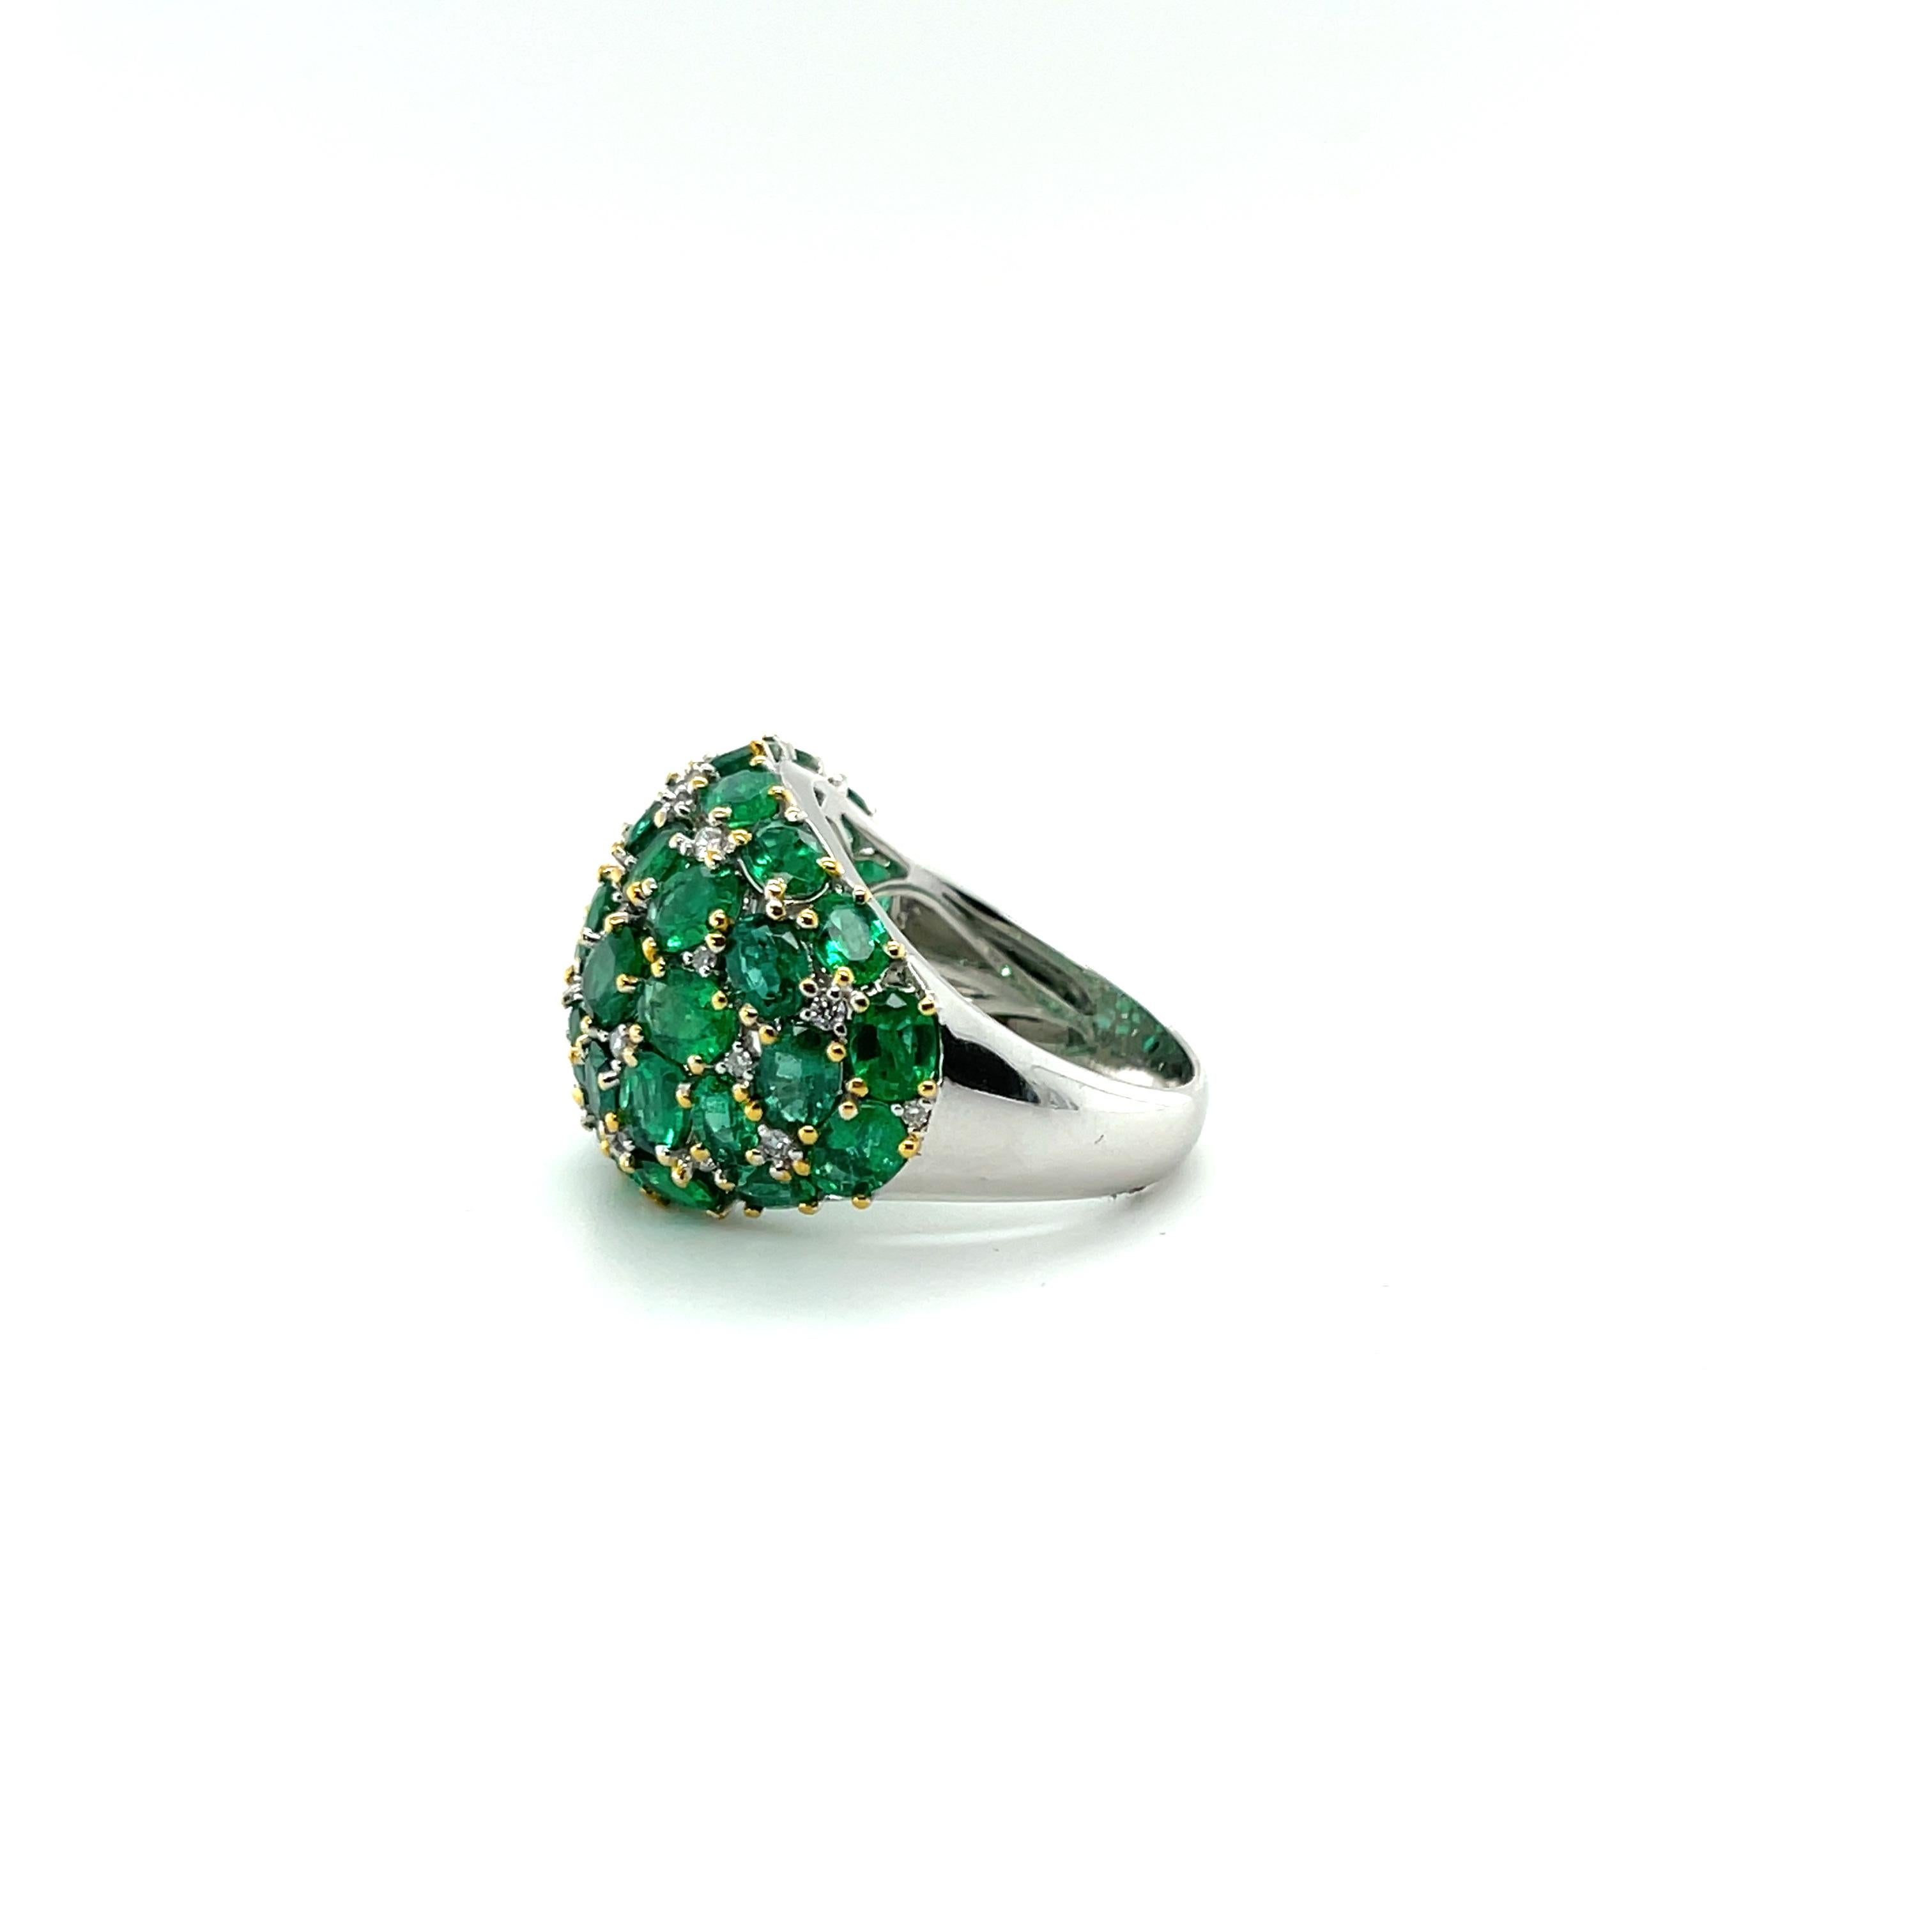 Simply Divine, gorgeous Emeralds and Diamonds, stunningly crafted into eighteen karat white gold, complimented by a stunning polished finish design. 


One ladies - 18ct white gold dress ring, wide, half round, tapered shank, multi-claw